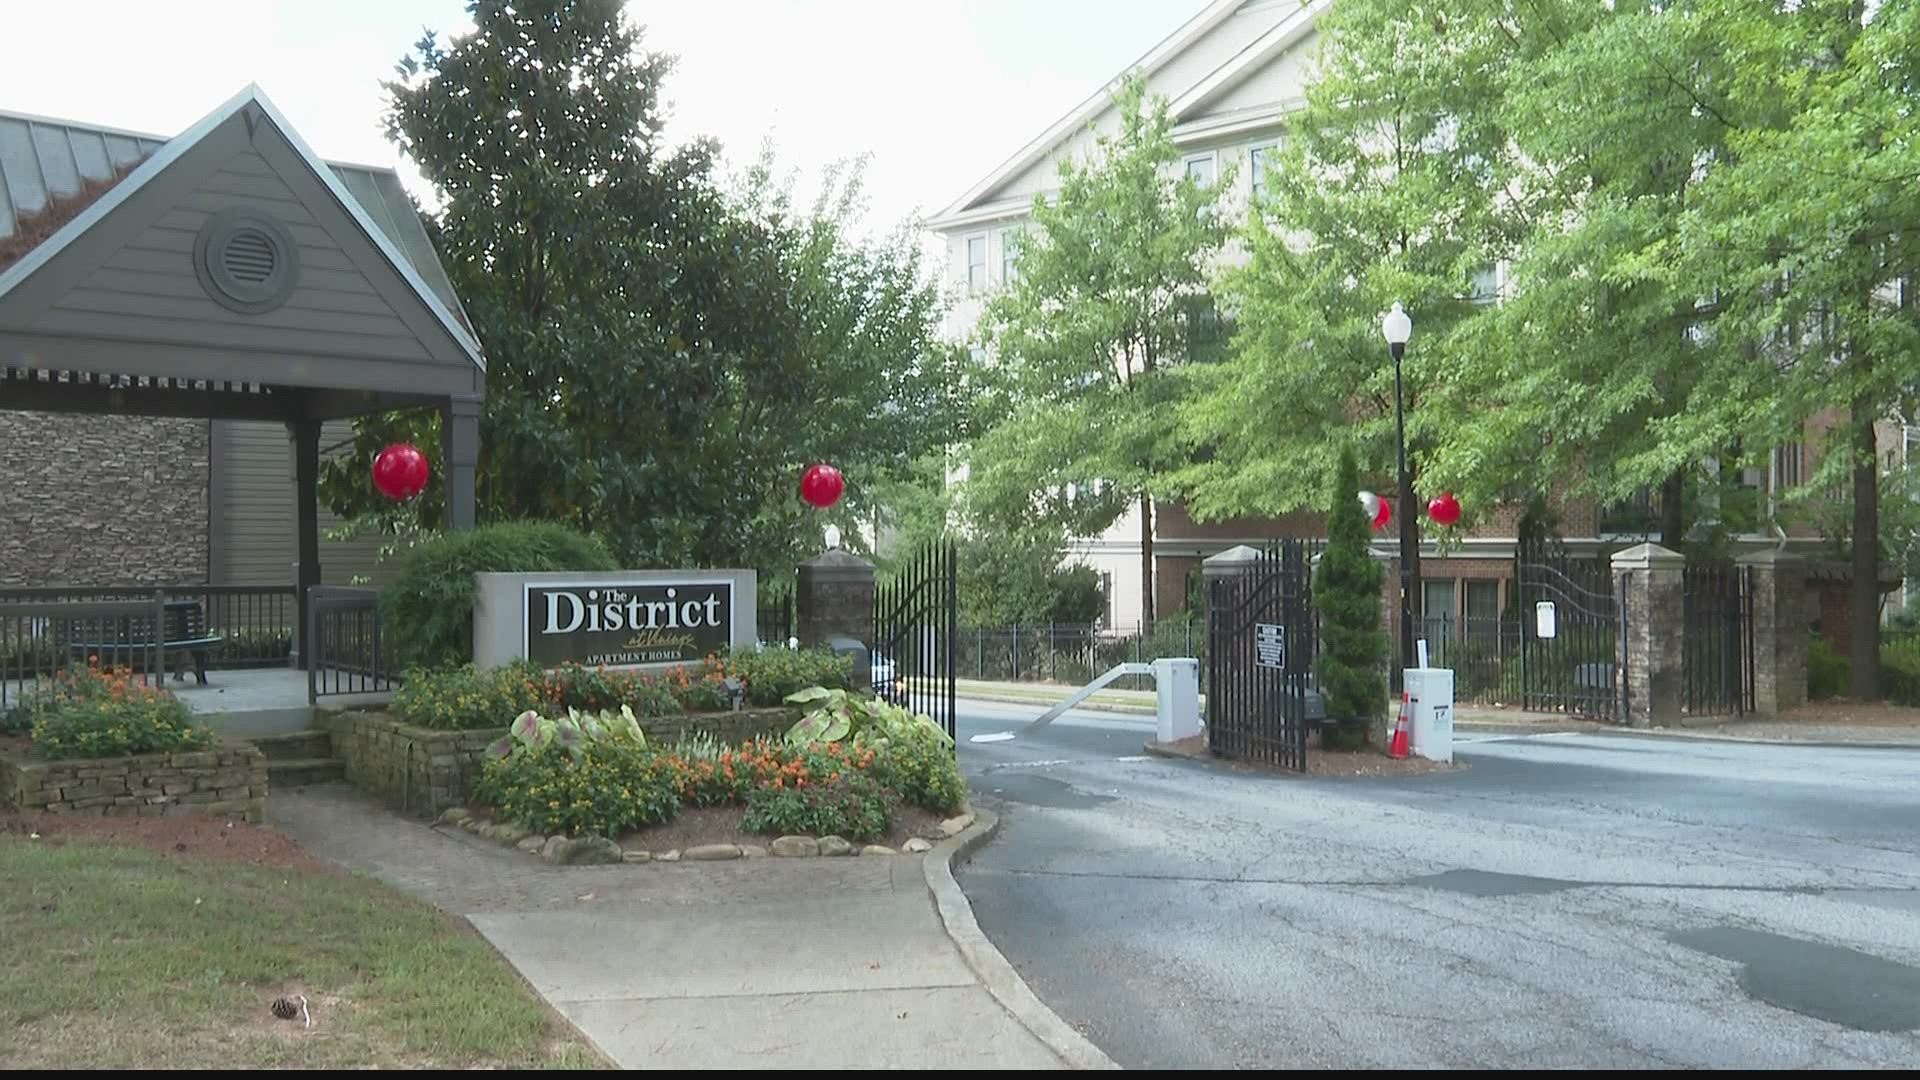 A person was shot Sunday morning at an apartment complex in Cobb County, police said. 
It happened at The District at Vinings apartments at 2800 Paces Ferry Road.